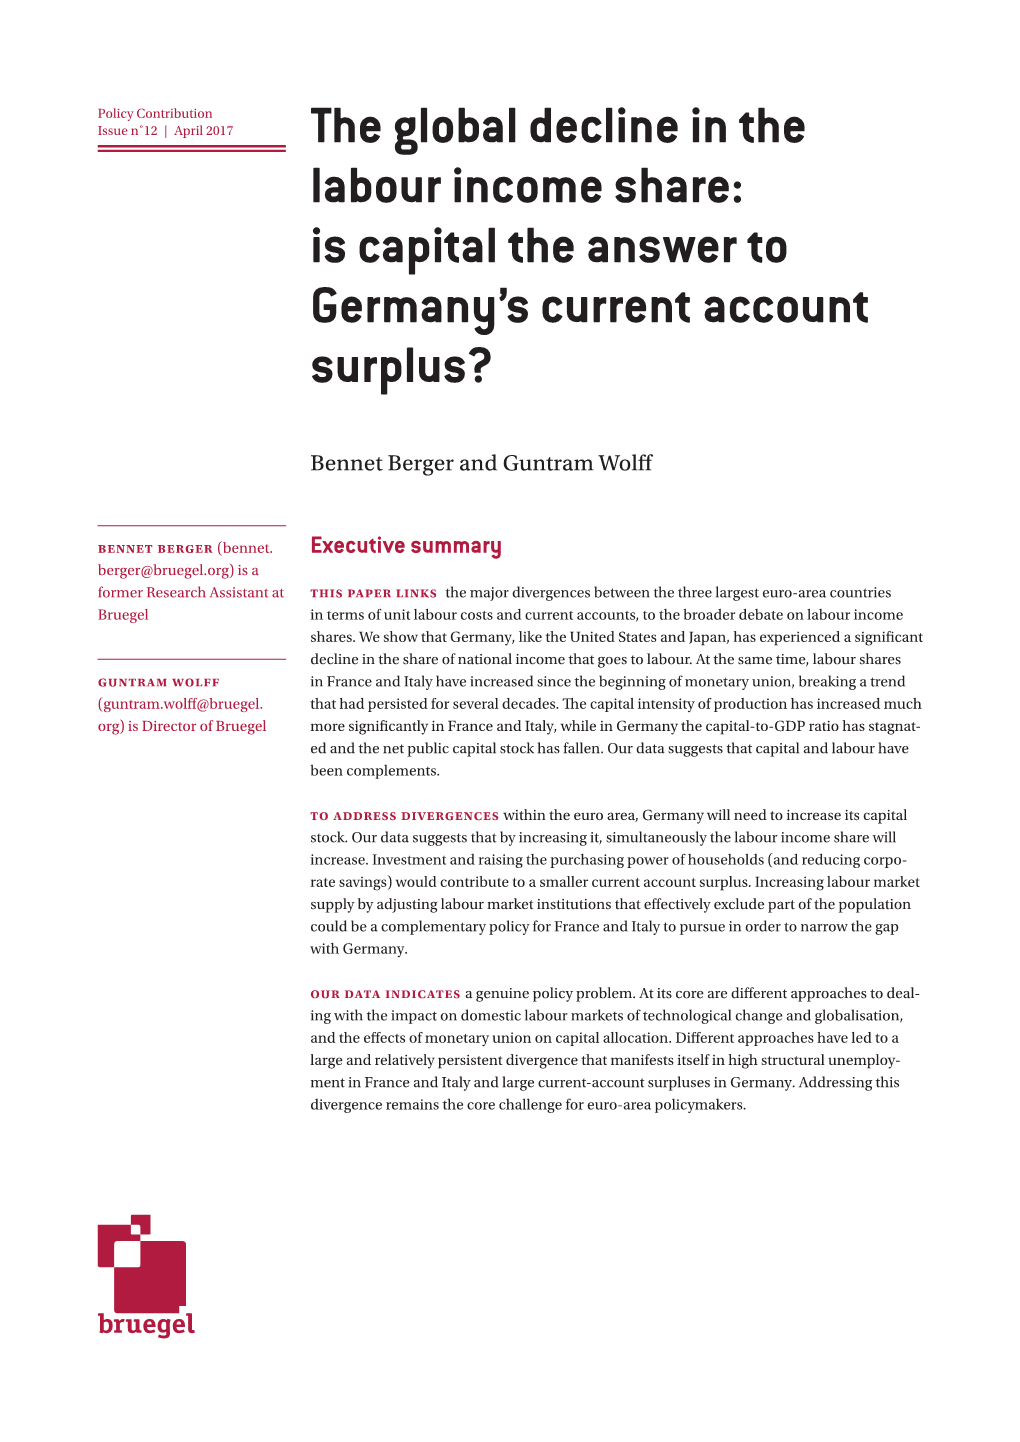 The Global Decline in the Labour Income Share: Is Capital the Answer to Germany’S Current Account Surplus?